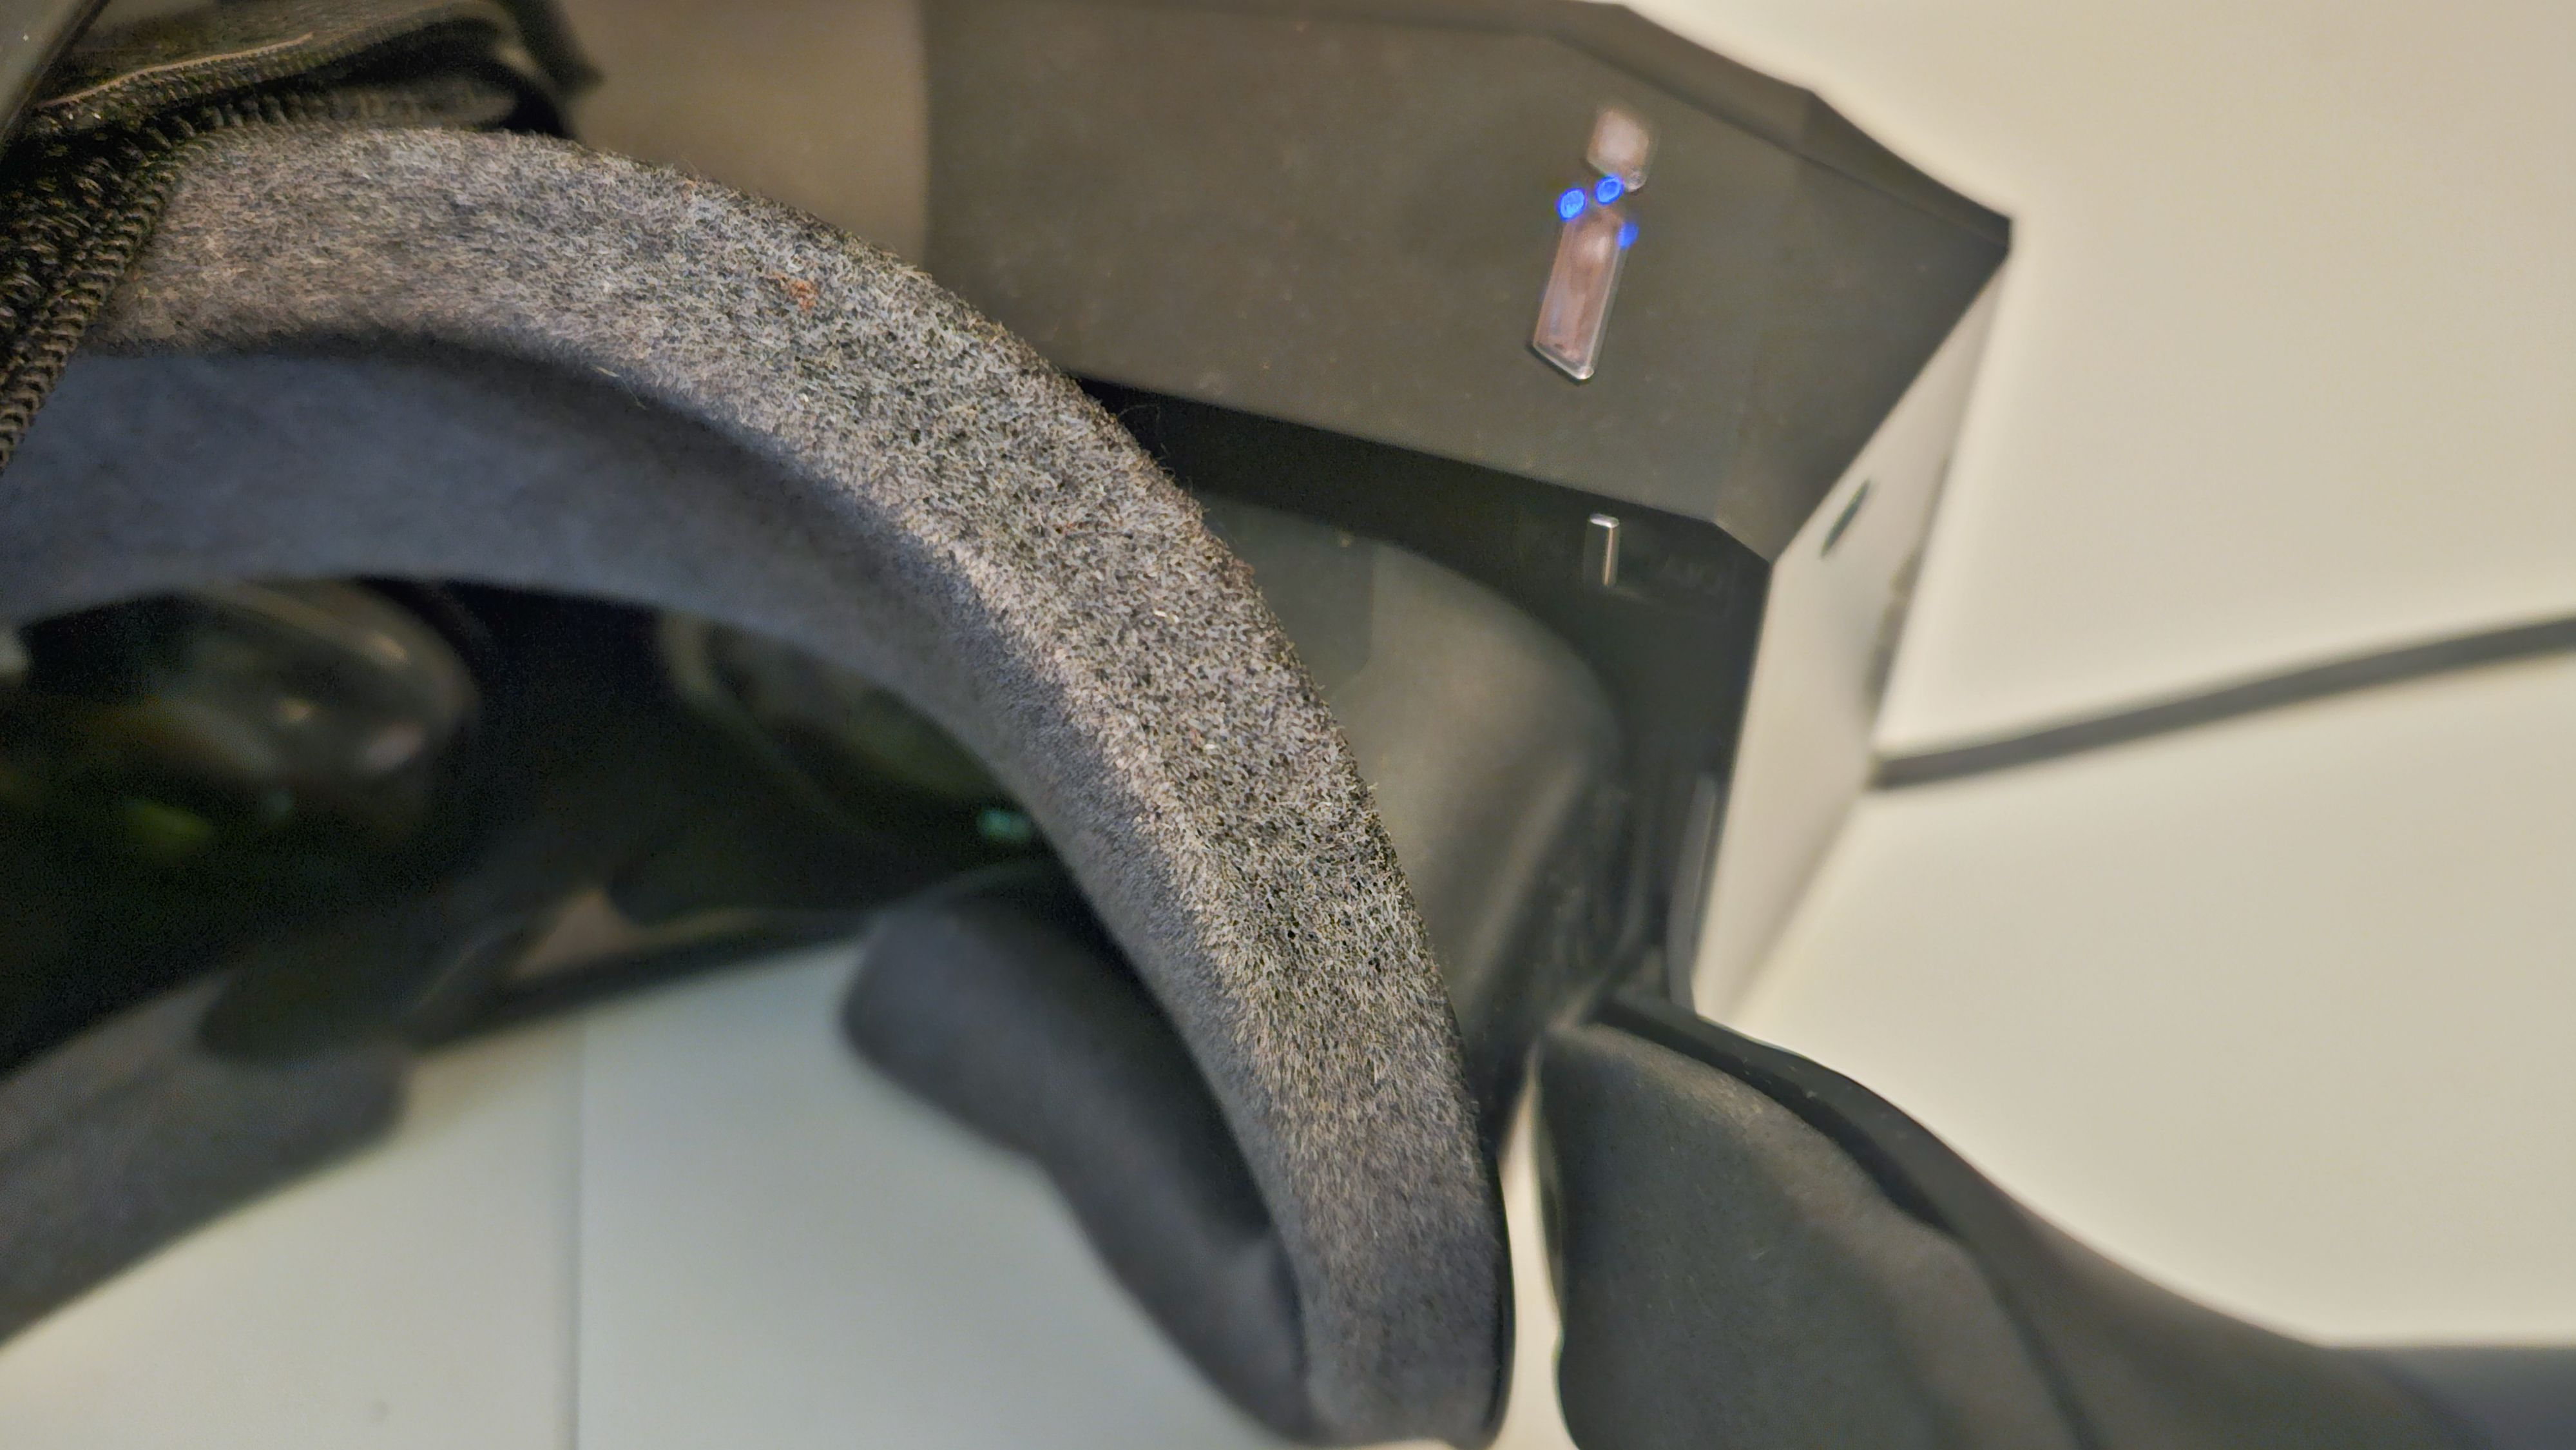 Pimax Crystal hands-on: a headset with astonishing visual clarity